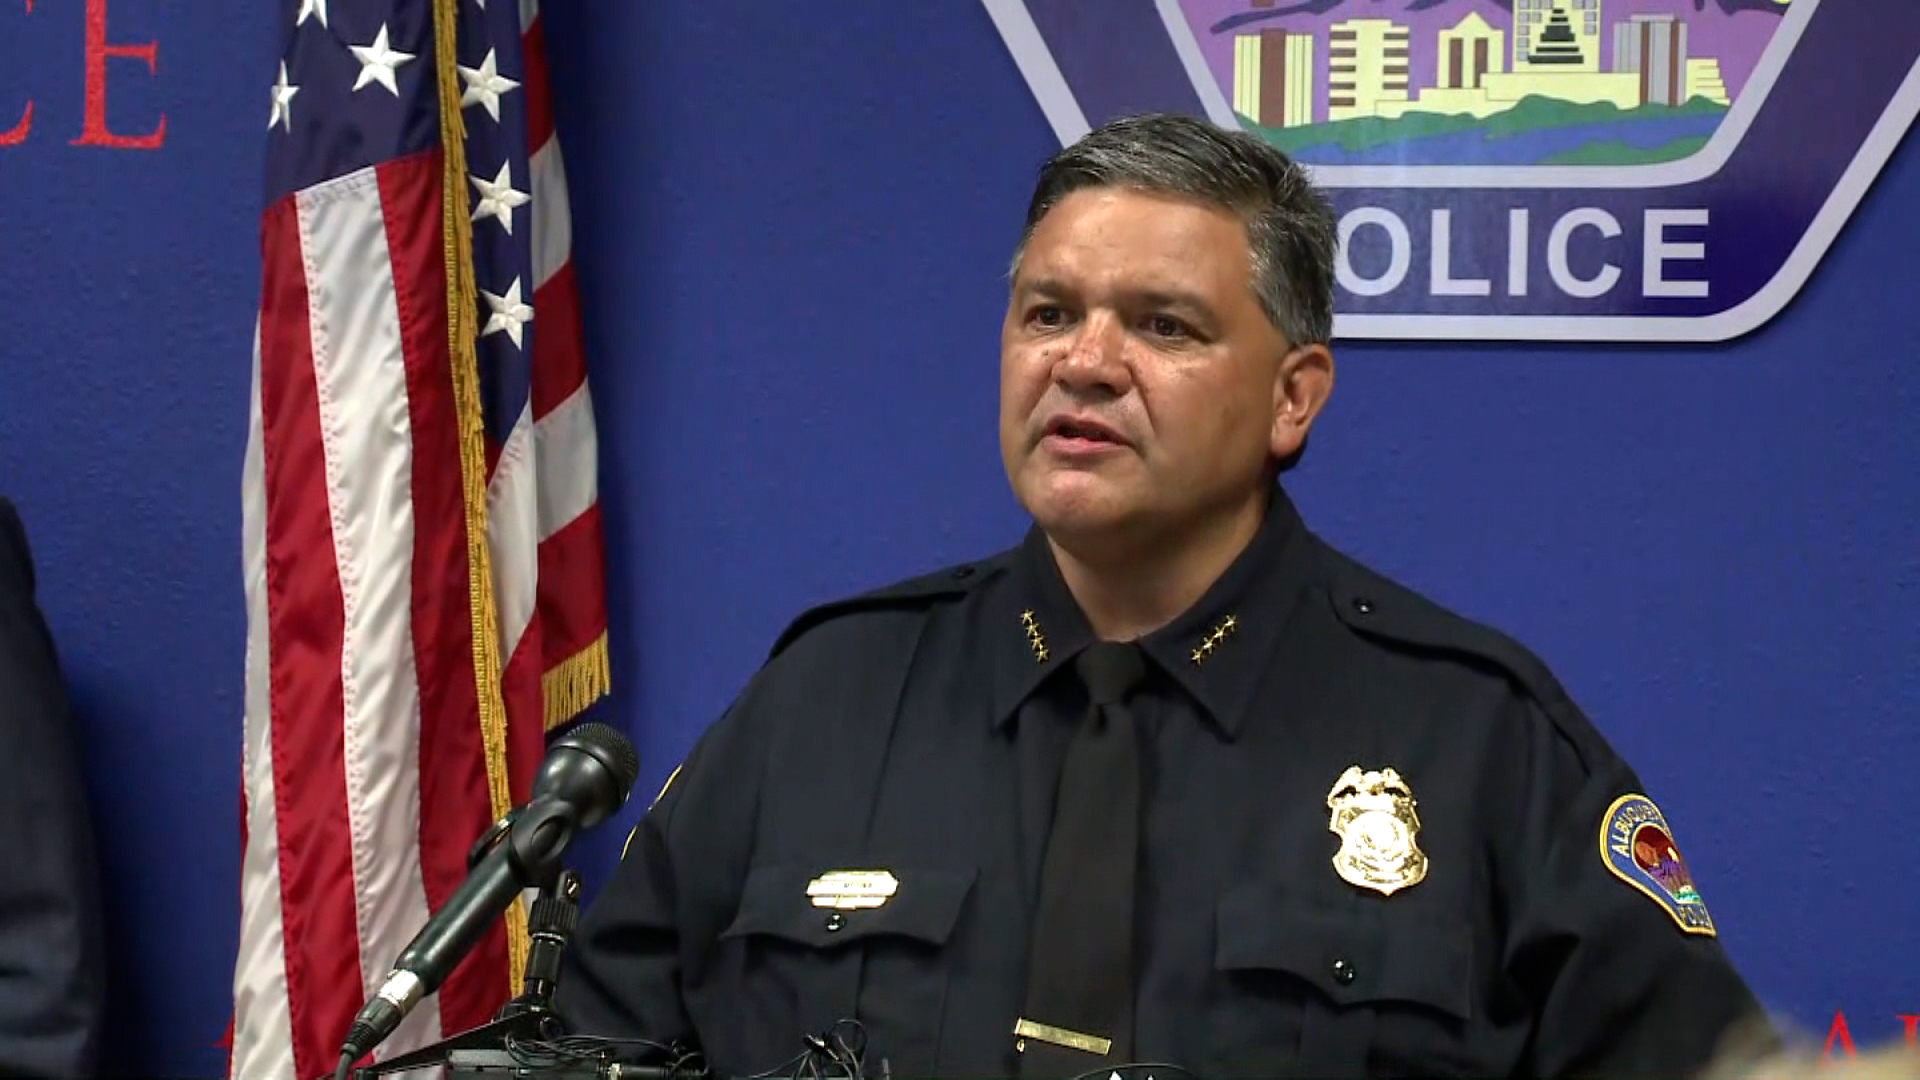 Albuquerque Police Chief Harold Medina speaks during a press conference in Albuquerque, New Mexico, on August 9.